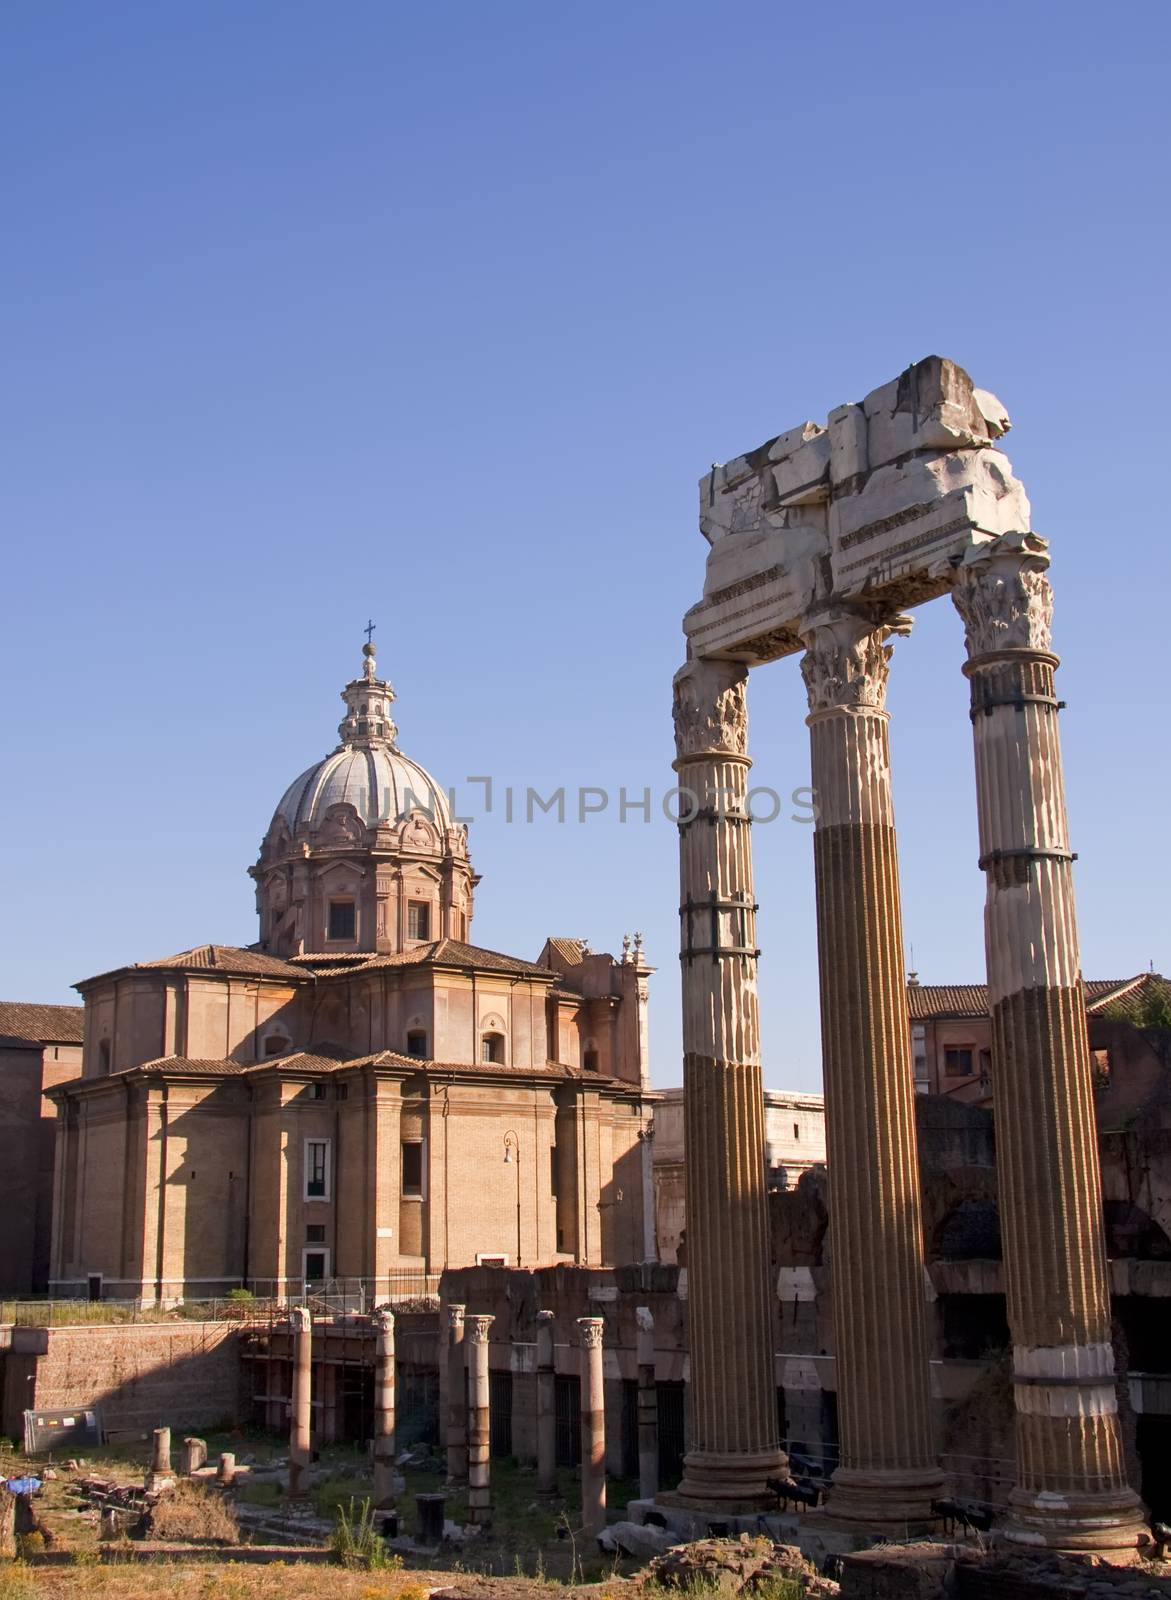 View with Forum Romanum in Rome by fotoecho